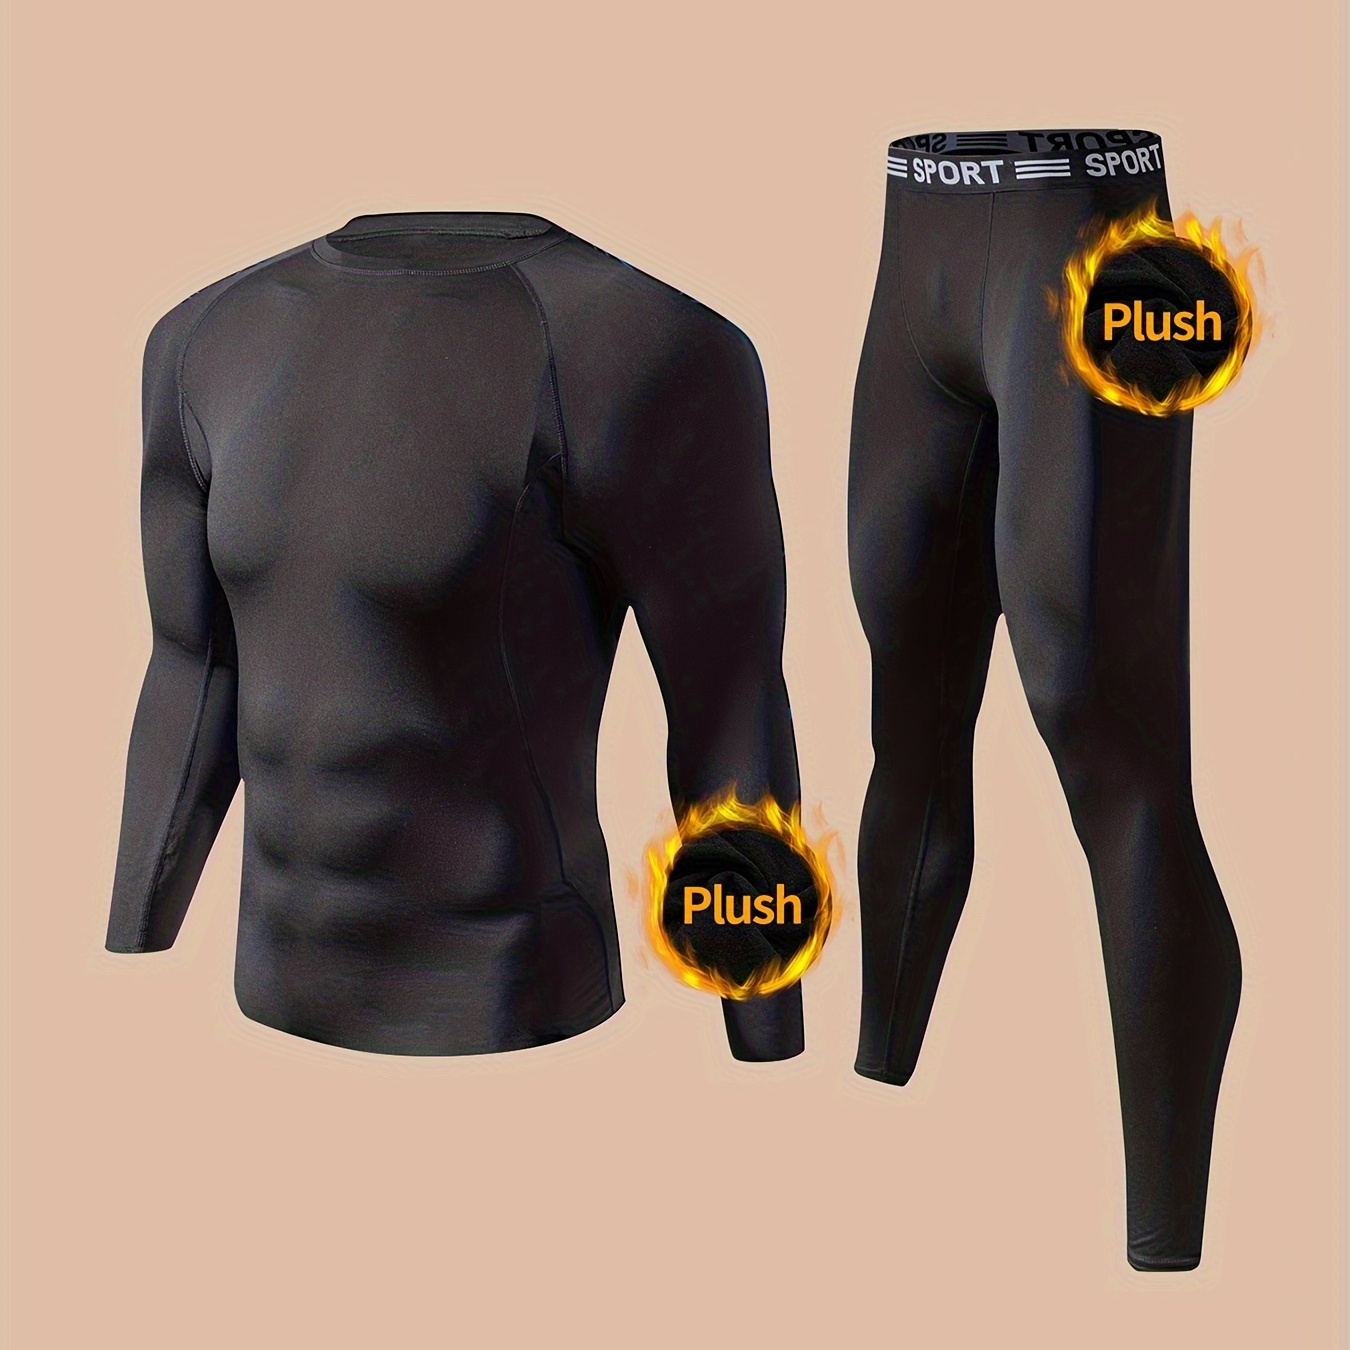 

Men's Thermal Wear Set, Warm Base Layers For Winter, Long Sleeve Tops And Bottoms, Outdoor Skiing Warm Leggings Tights, Body Shaper Set